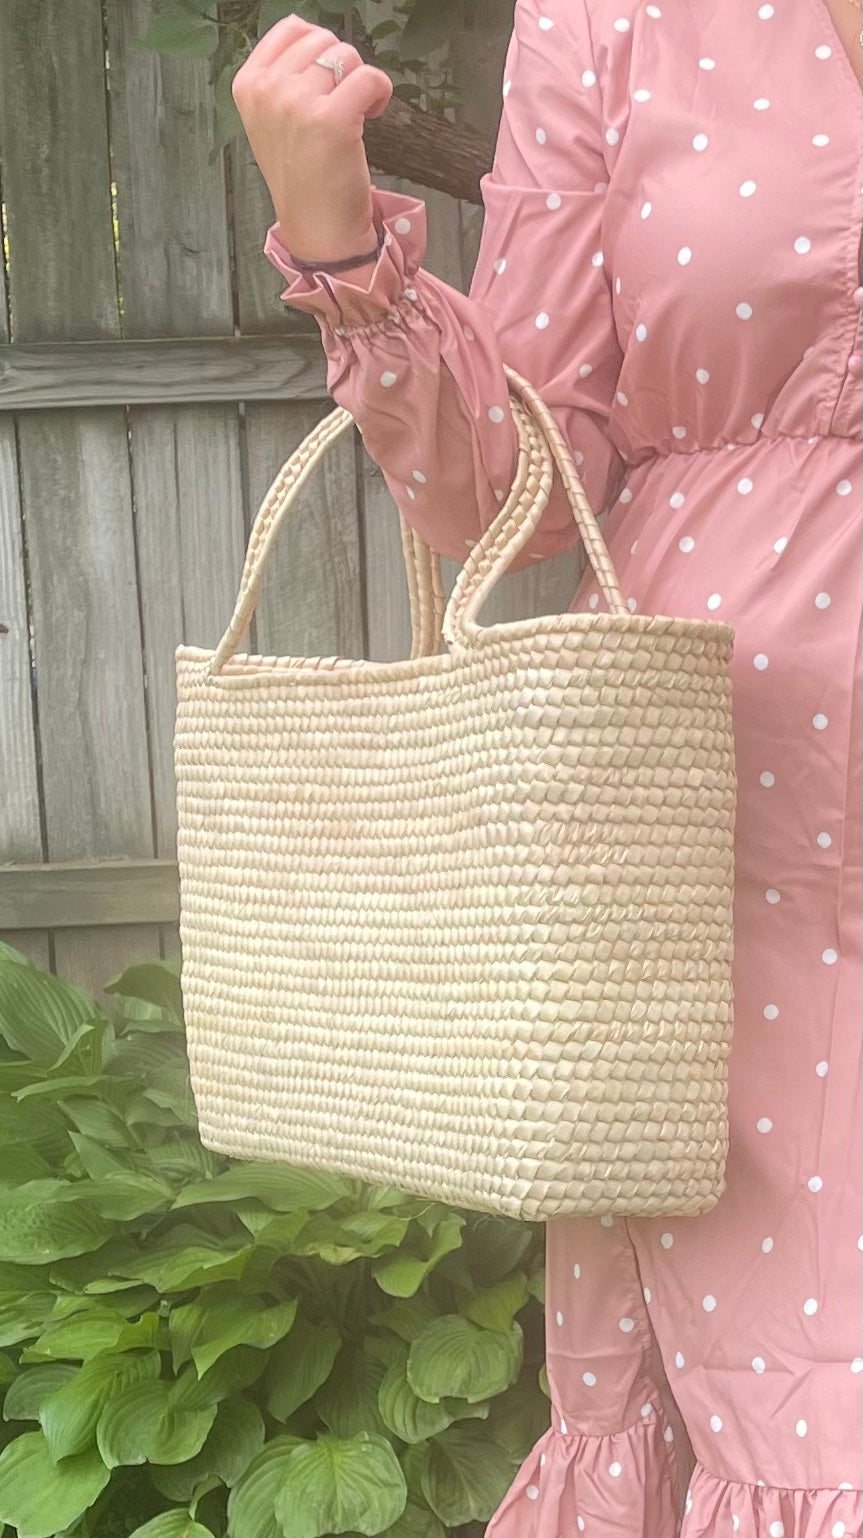 MOMMY And Mini Market Tote